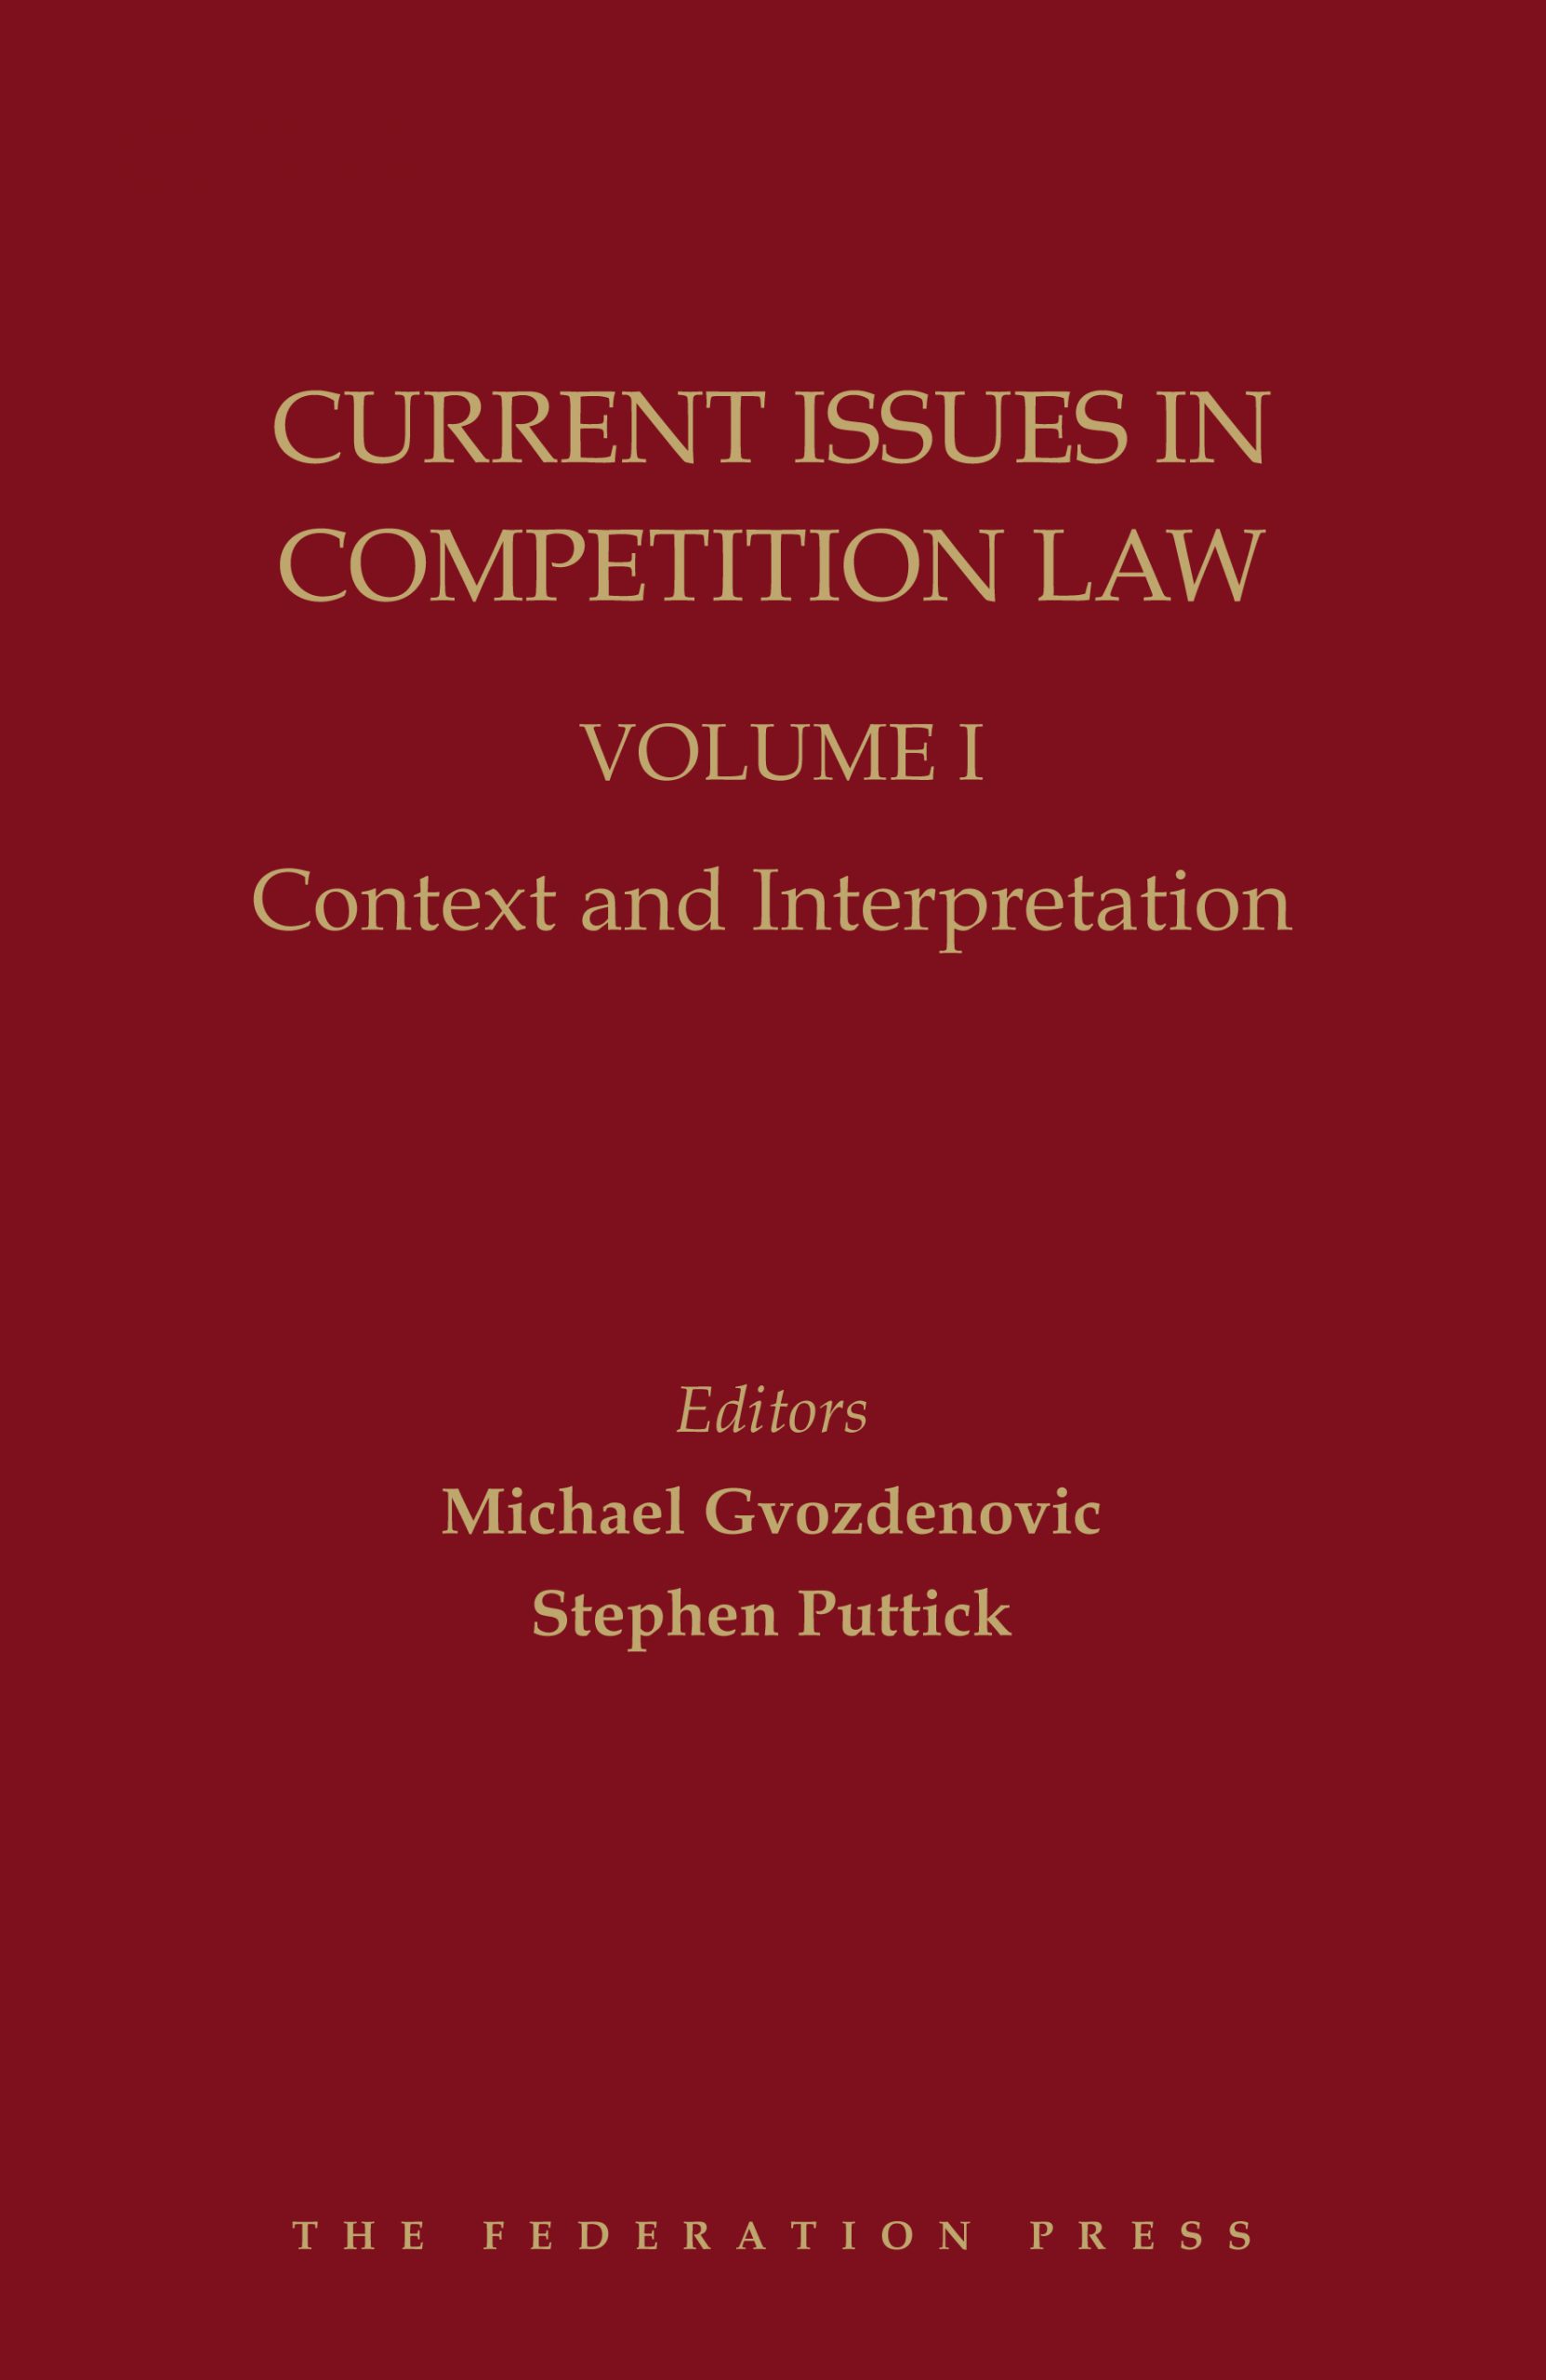 Law:　Press　Vol　Federation　in　The　Current　I　Issues　Competition